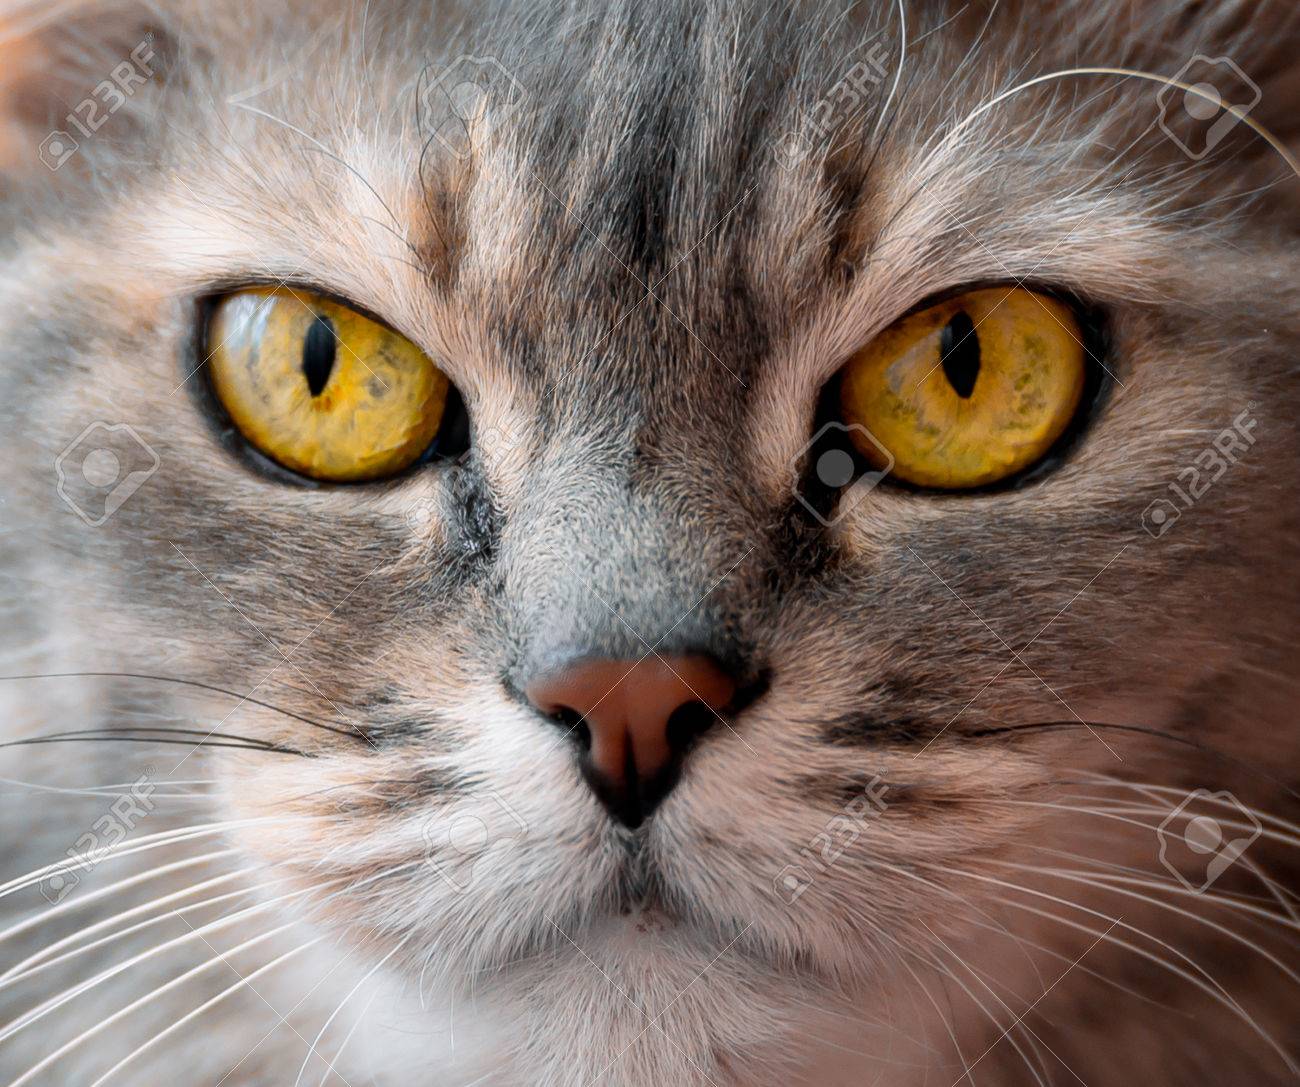 75485255-yellow-eyes-cat-portrait-close-up-serious-look-hunting.jpg